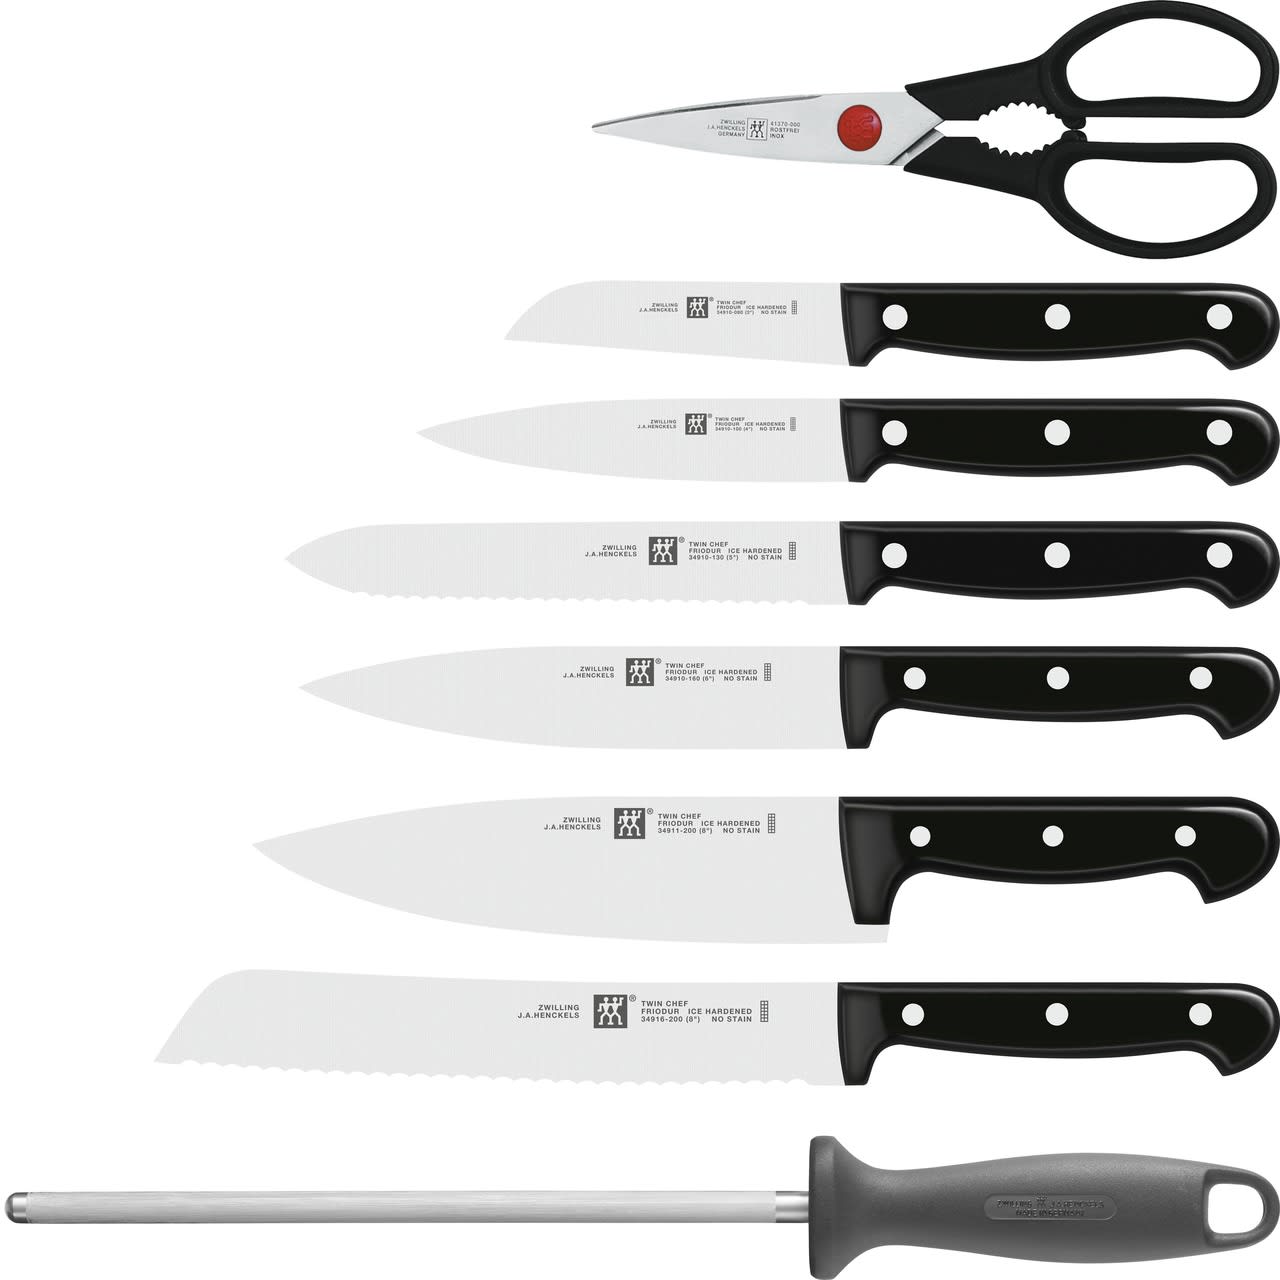 ZWILLING® Twin Chef 2 9 Piece Knife Block Set